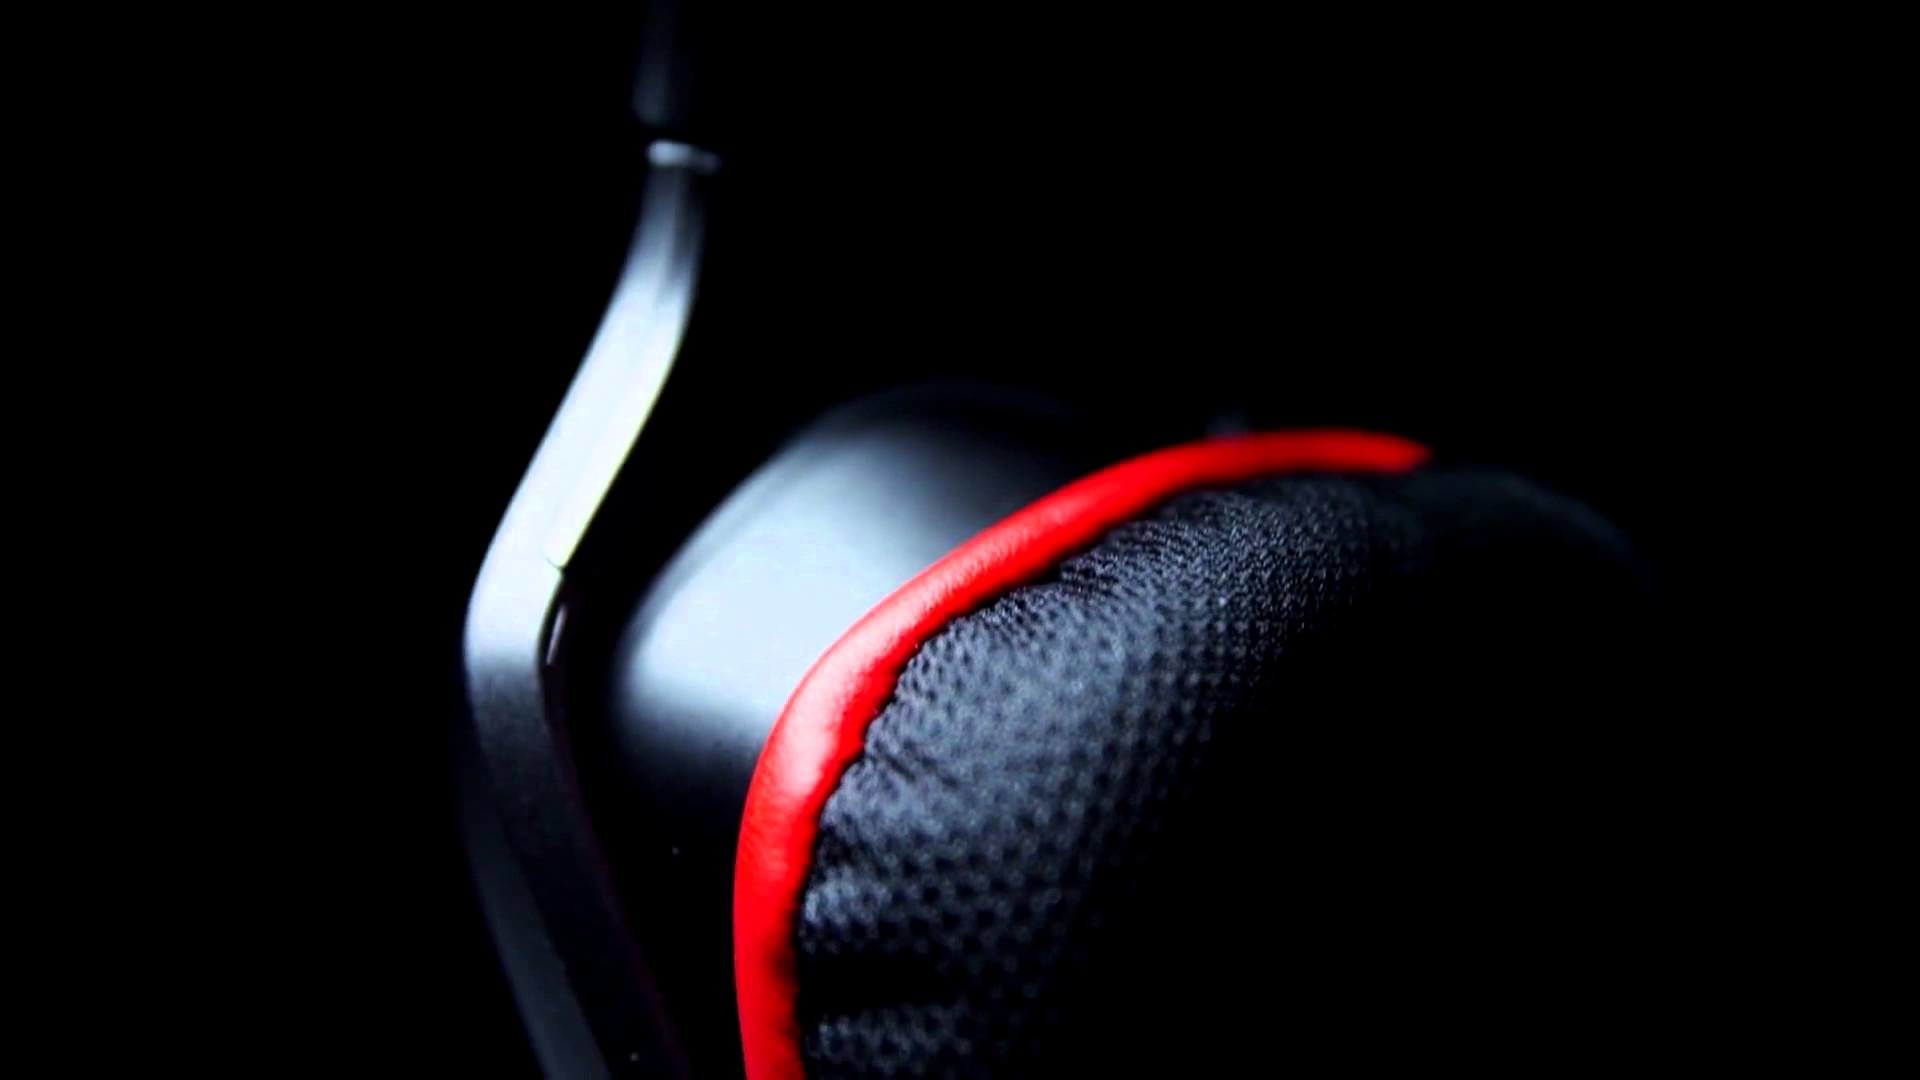 1920x1080 Download Logitech Gaming Wallpaper Gallery Logitech | I just wrote a blog  ...